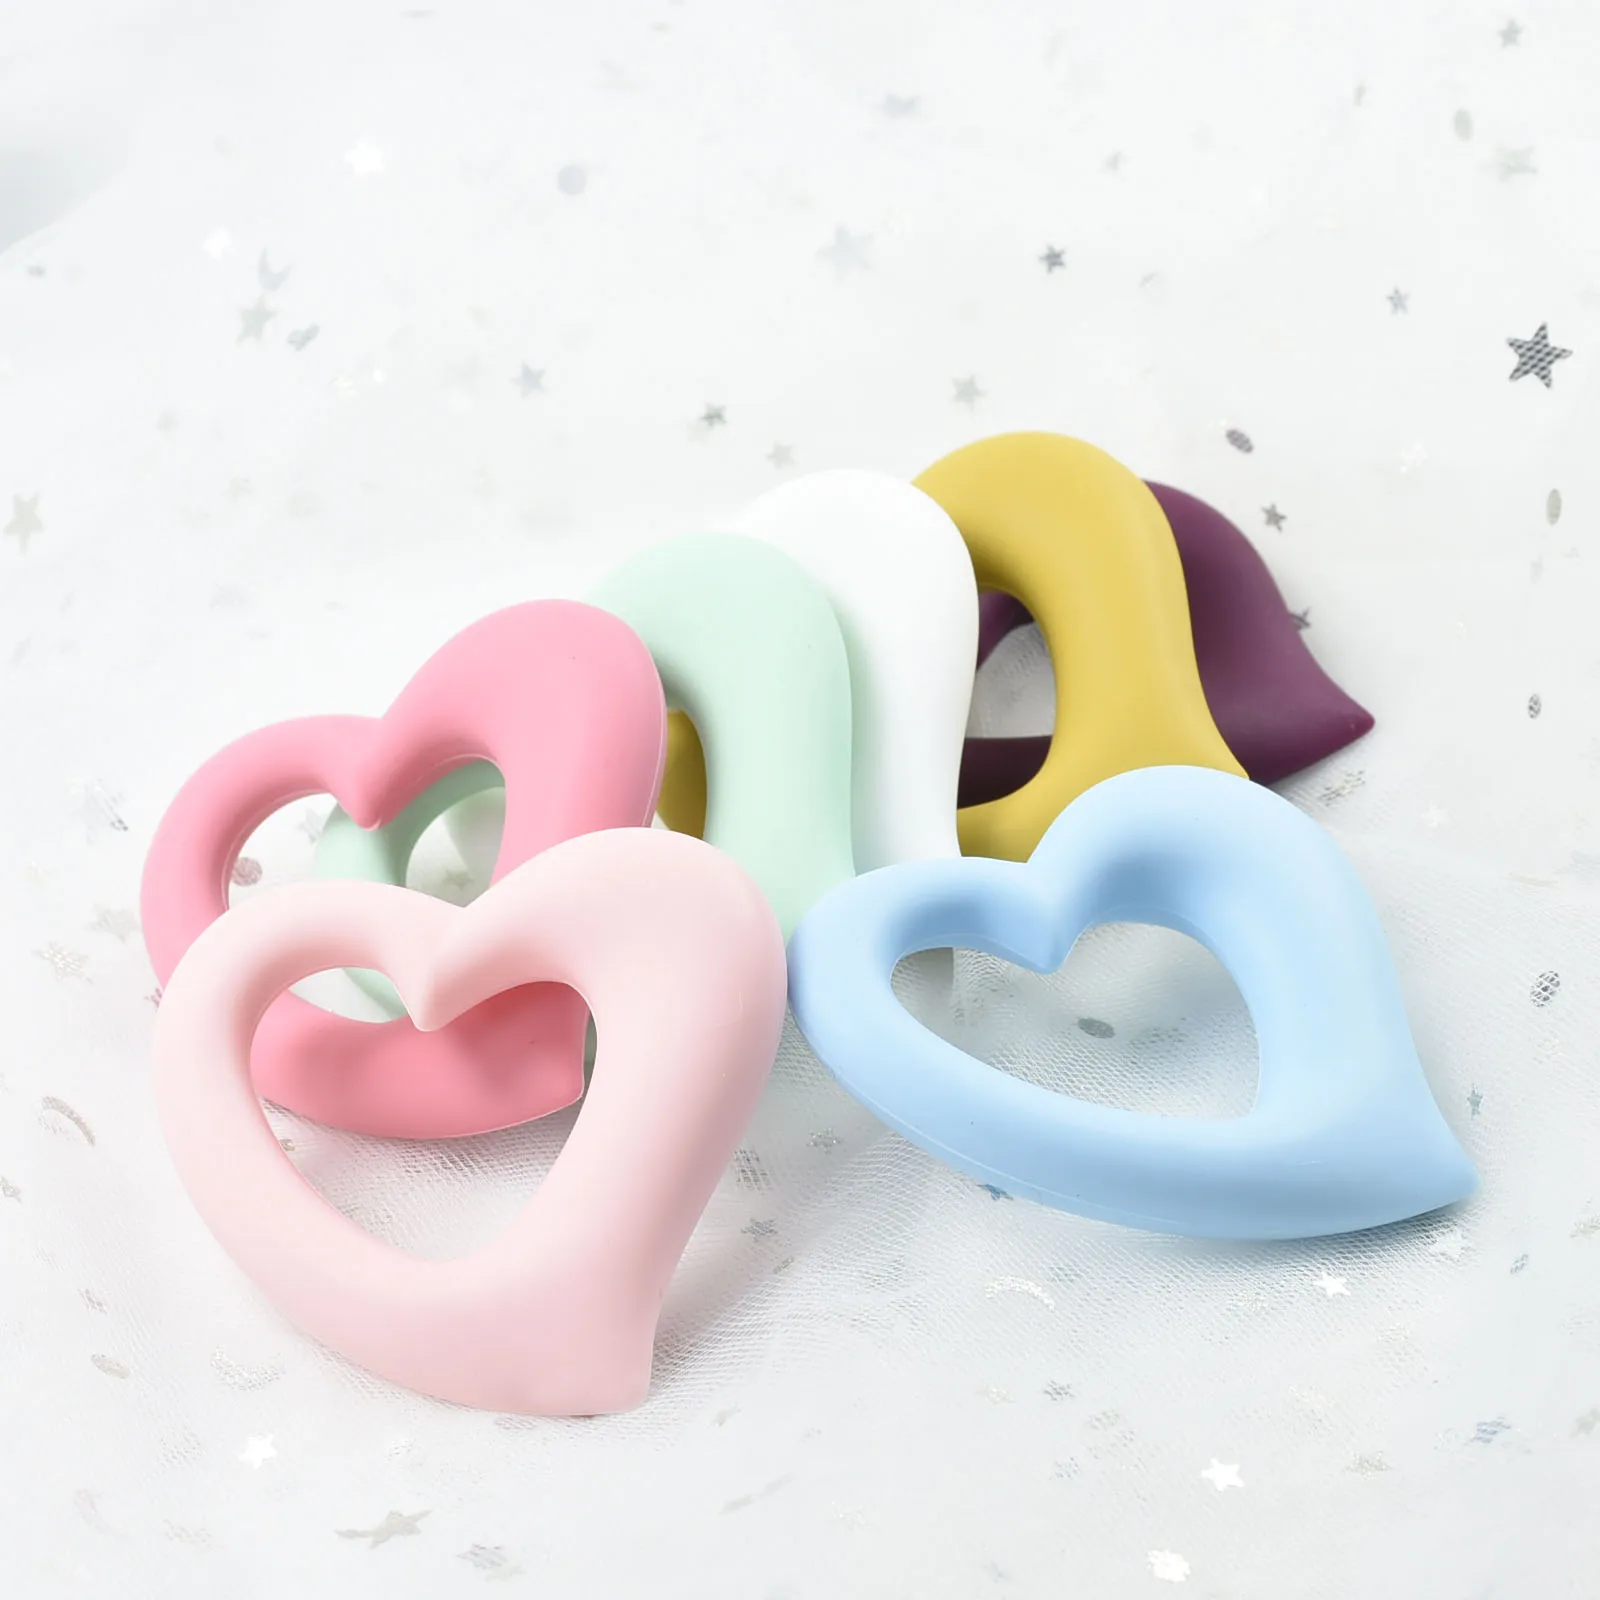 

5 PCS Silicone Teethers Cute Heart Baby Teether Chewable Teething Toy Tooth Nursing Newborn Shower Gift Baby Sensory Toys